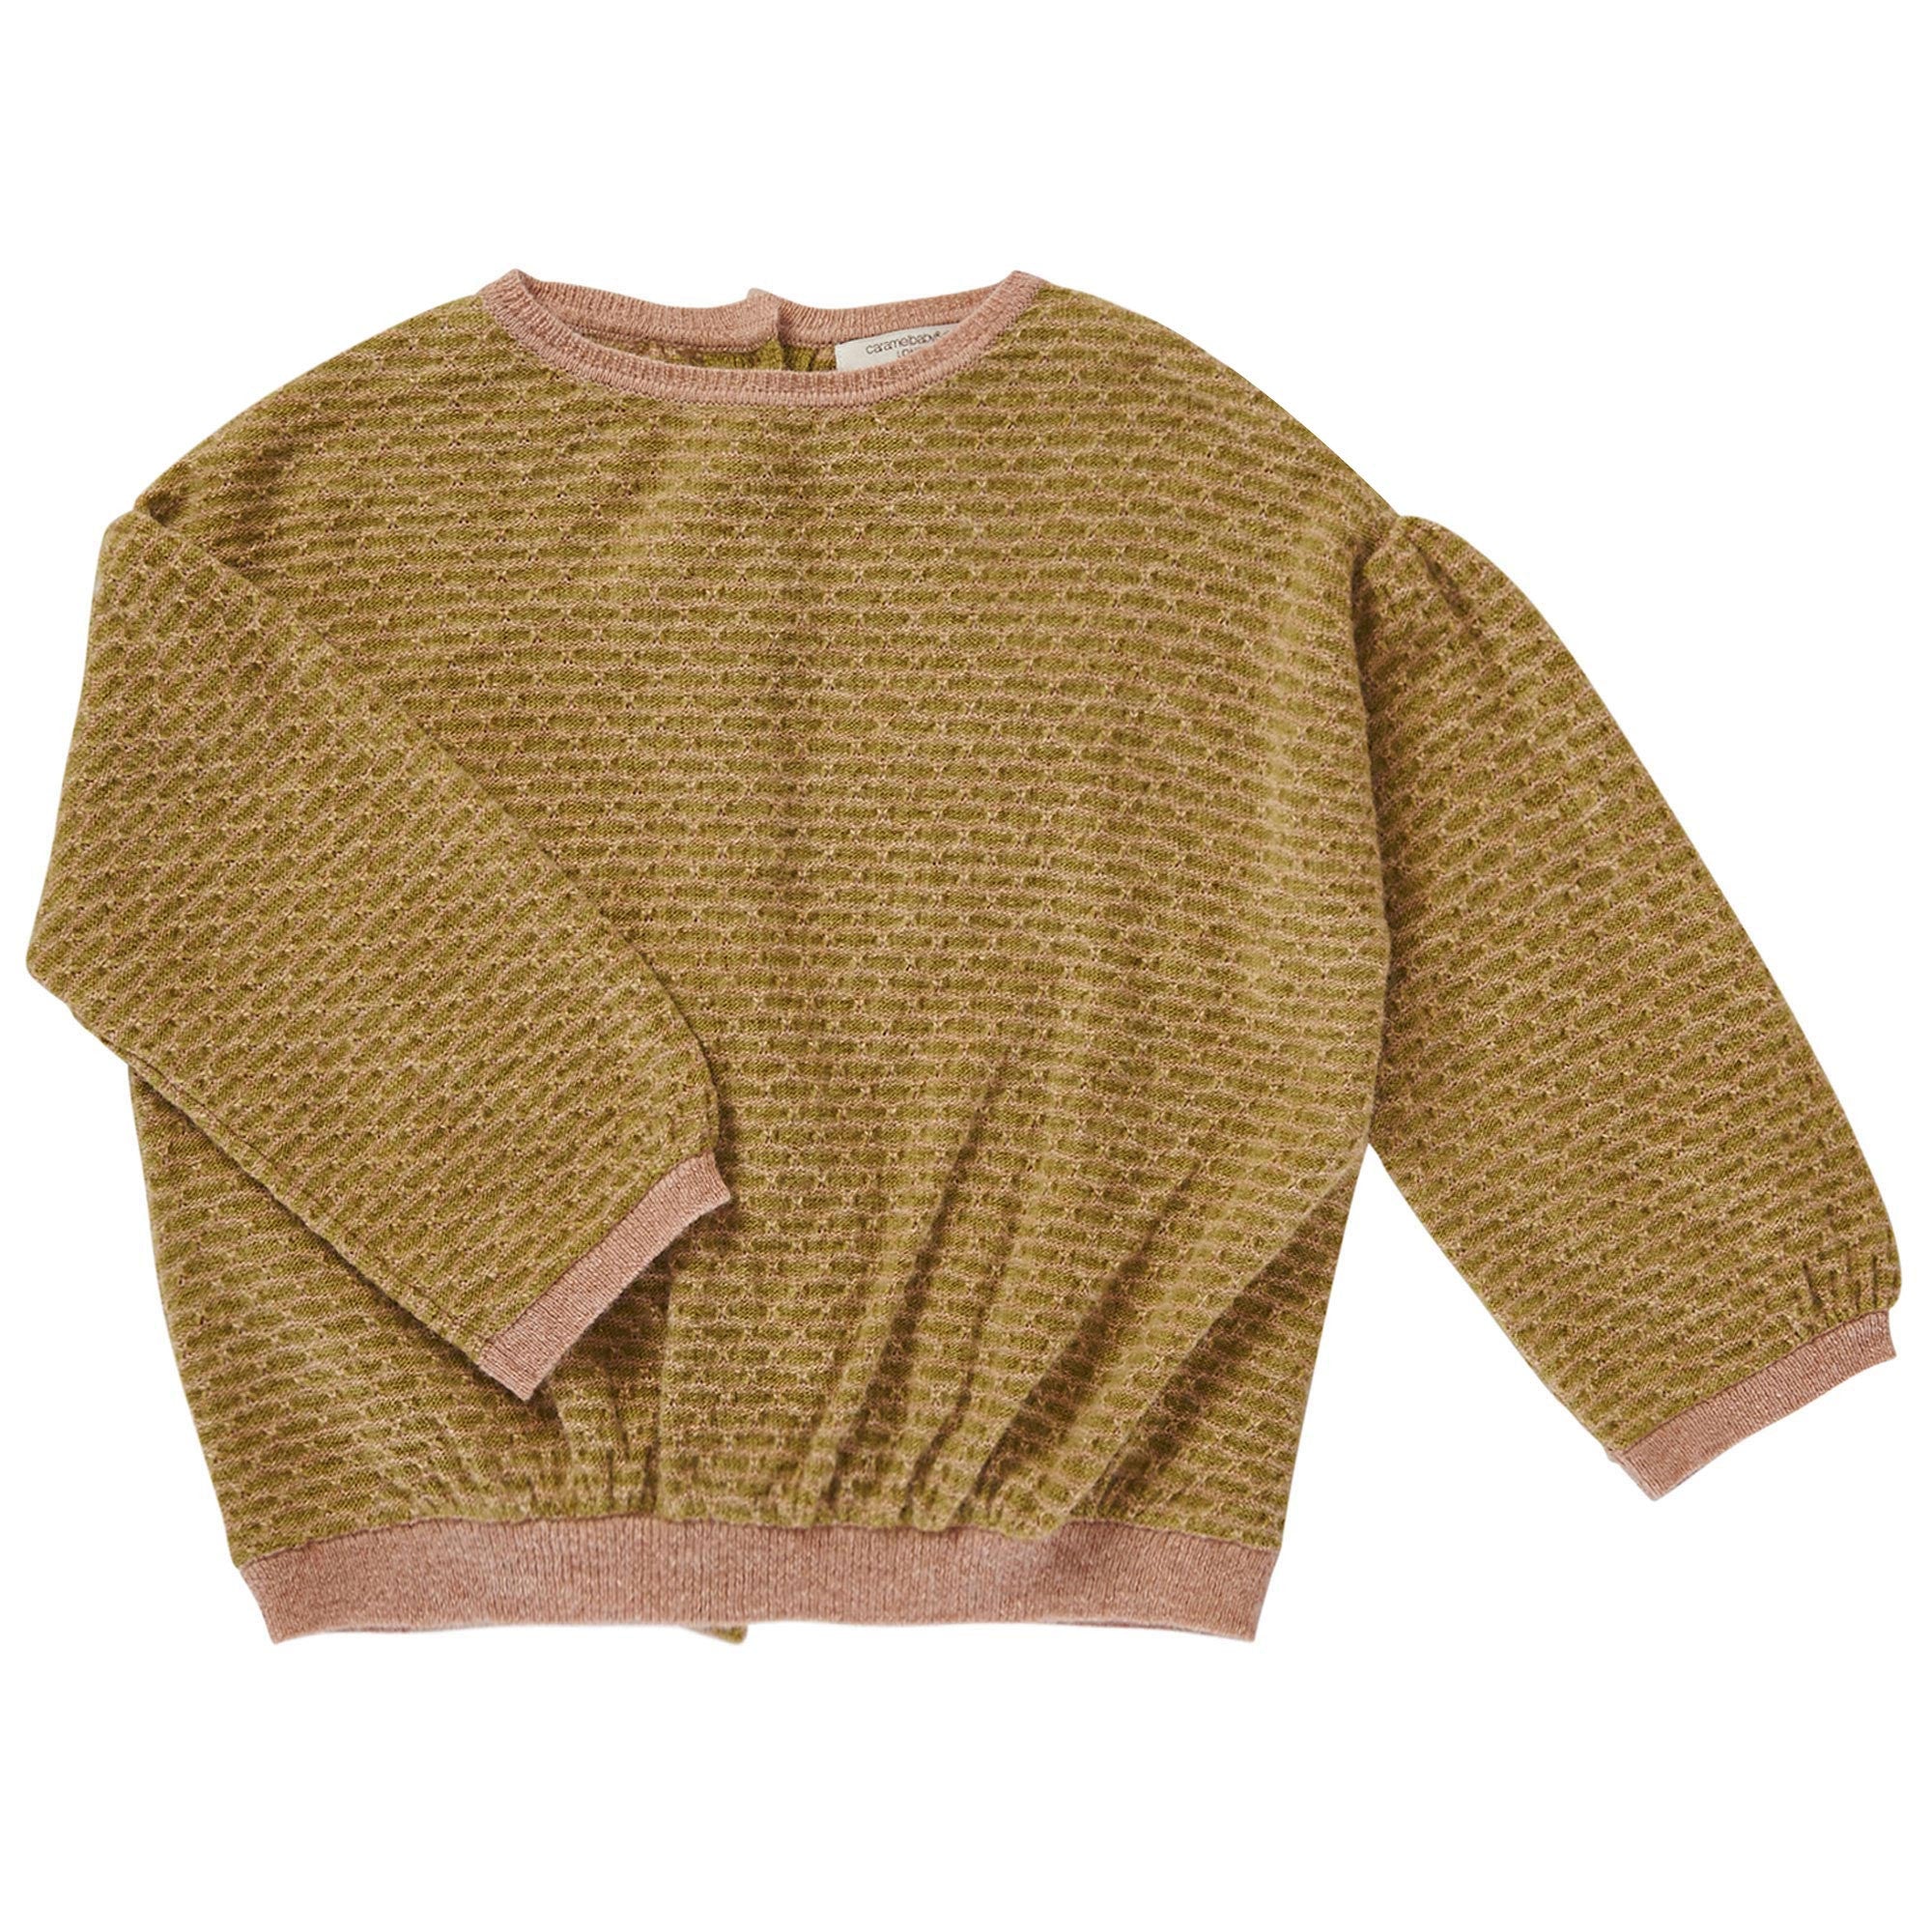 Boys Yellow-green Knitted Wool Sweater - CÉMAROSE | Children's Fashion Store - 1